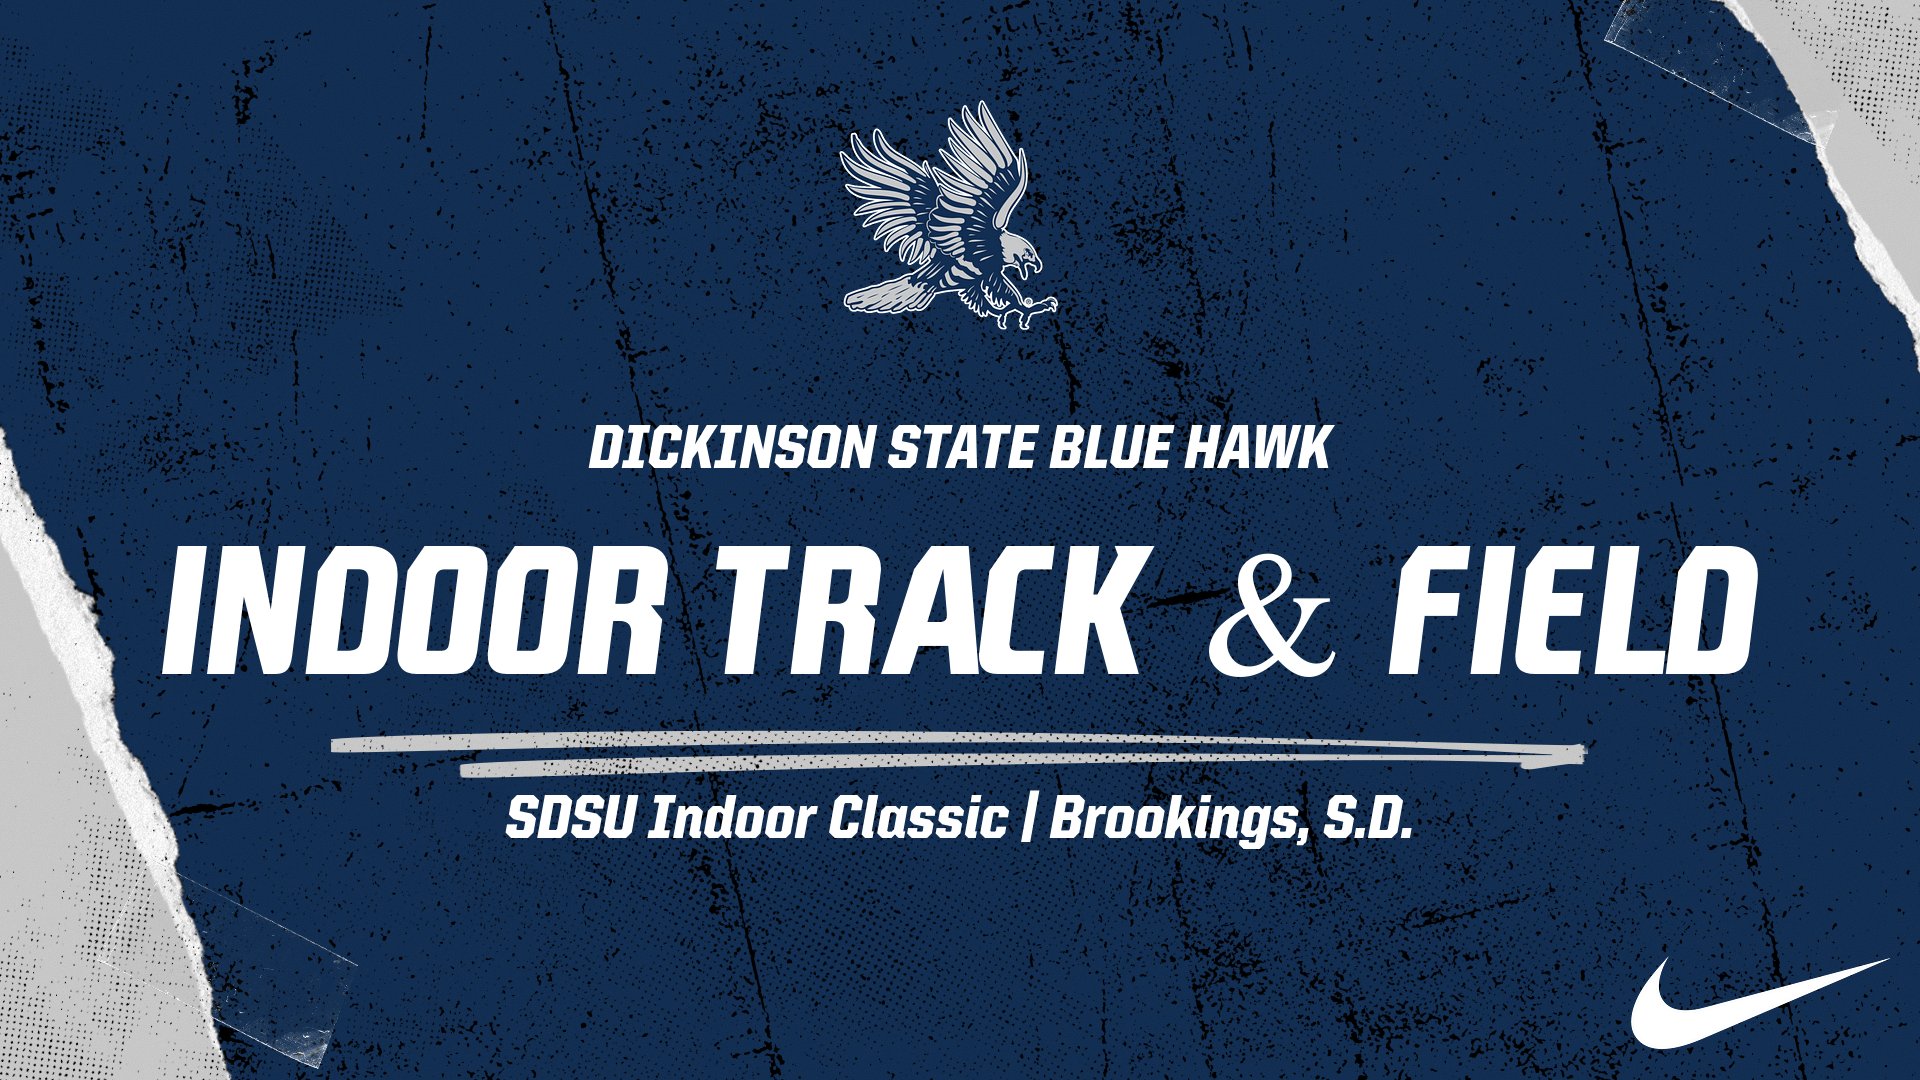 Two more school records fall for Blue Hawk track and field in final tune-up before NSAA Championships